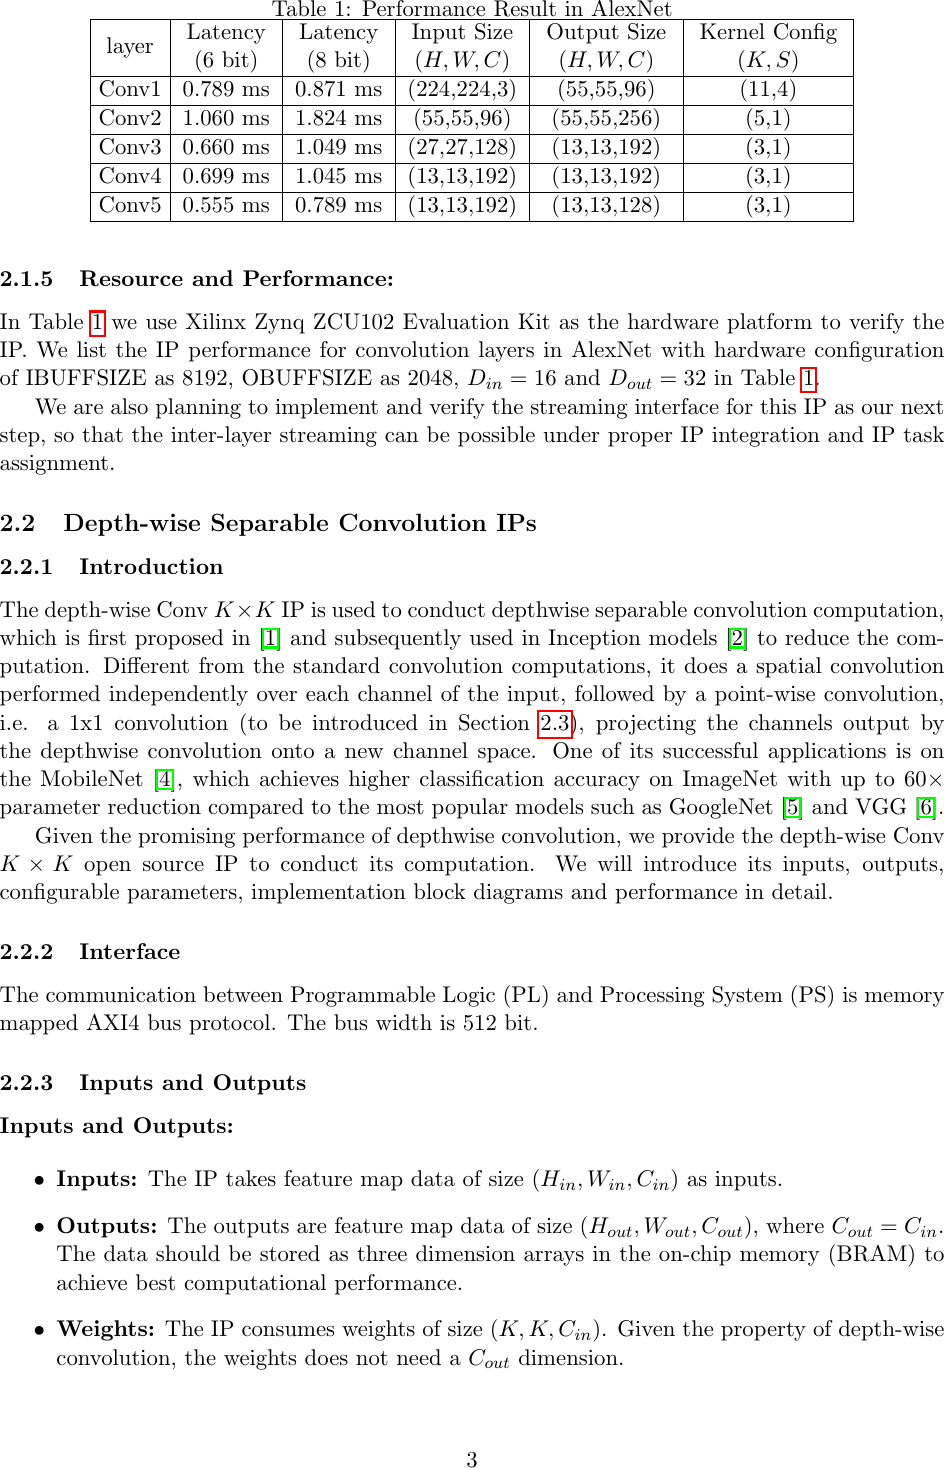 Page 3 of 10 - Open Source IP Manual